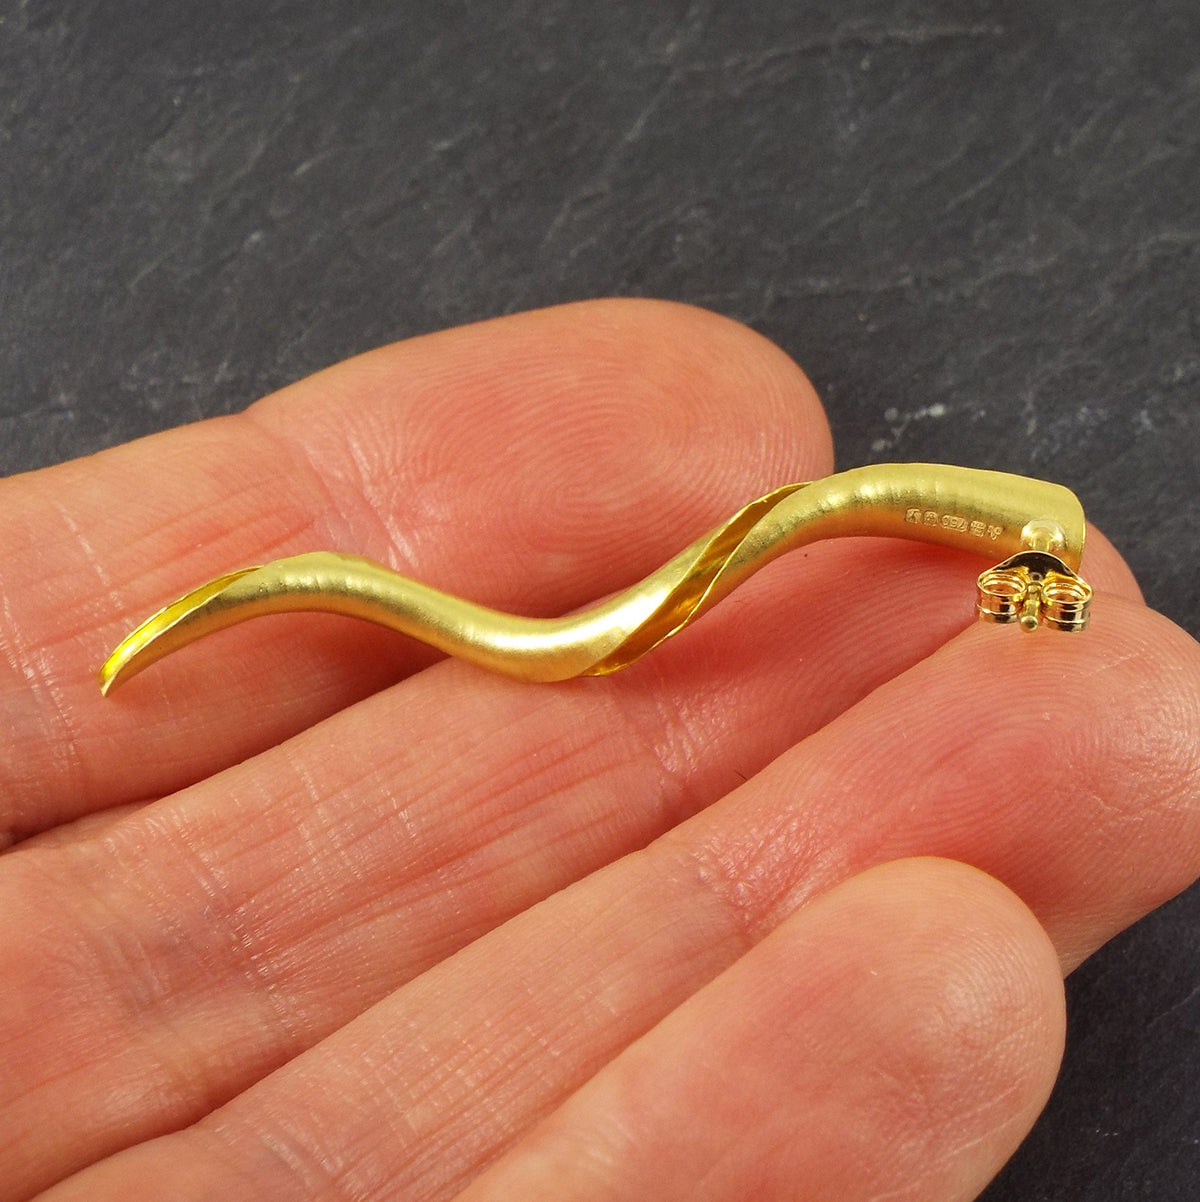 A pair of mirror image gold spiral stud earrings, each in the form of a tapered spiralling tube with one side open to show the inner surface. They have a satin matte finish and hammered texture. Shown here in the hand to demonstrate scale and to show the hallmark.